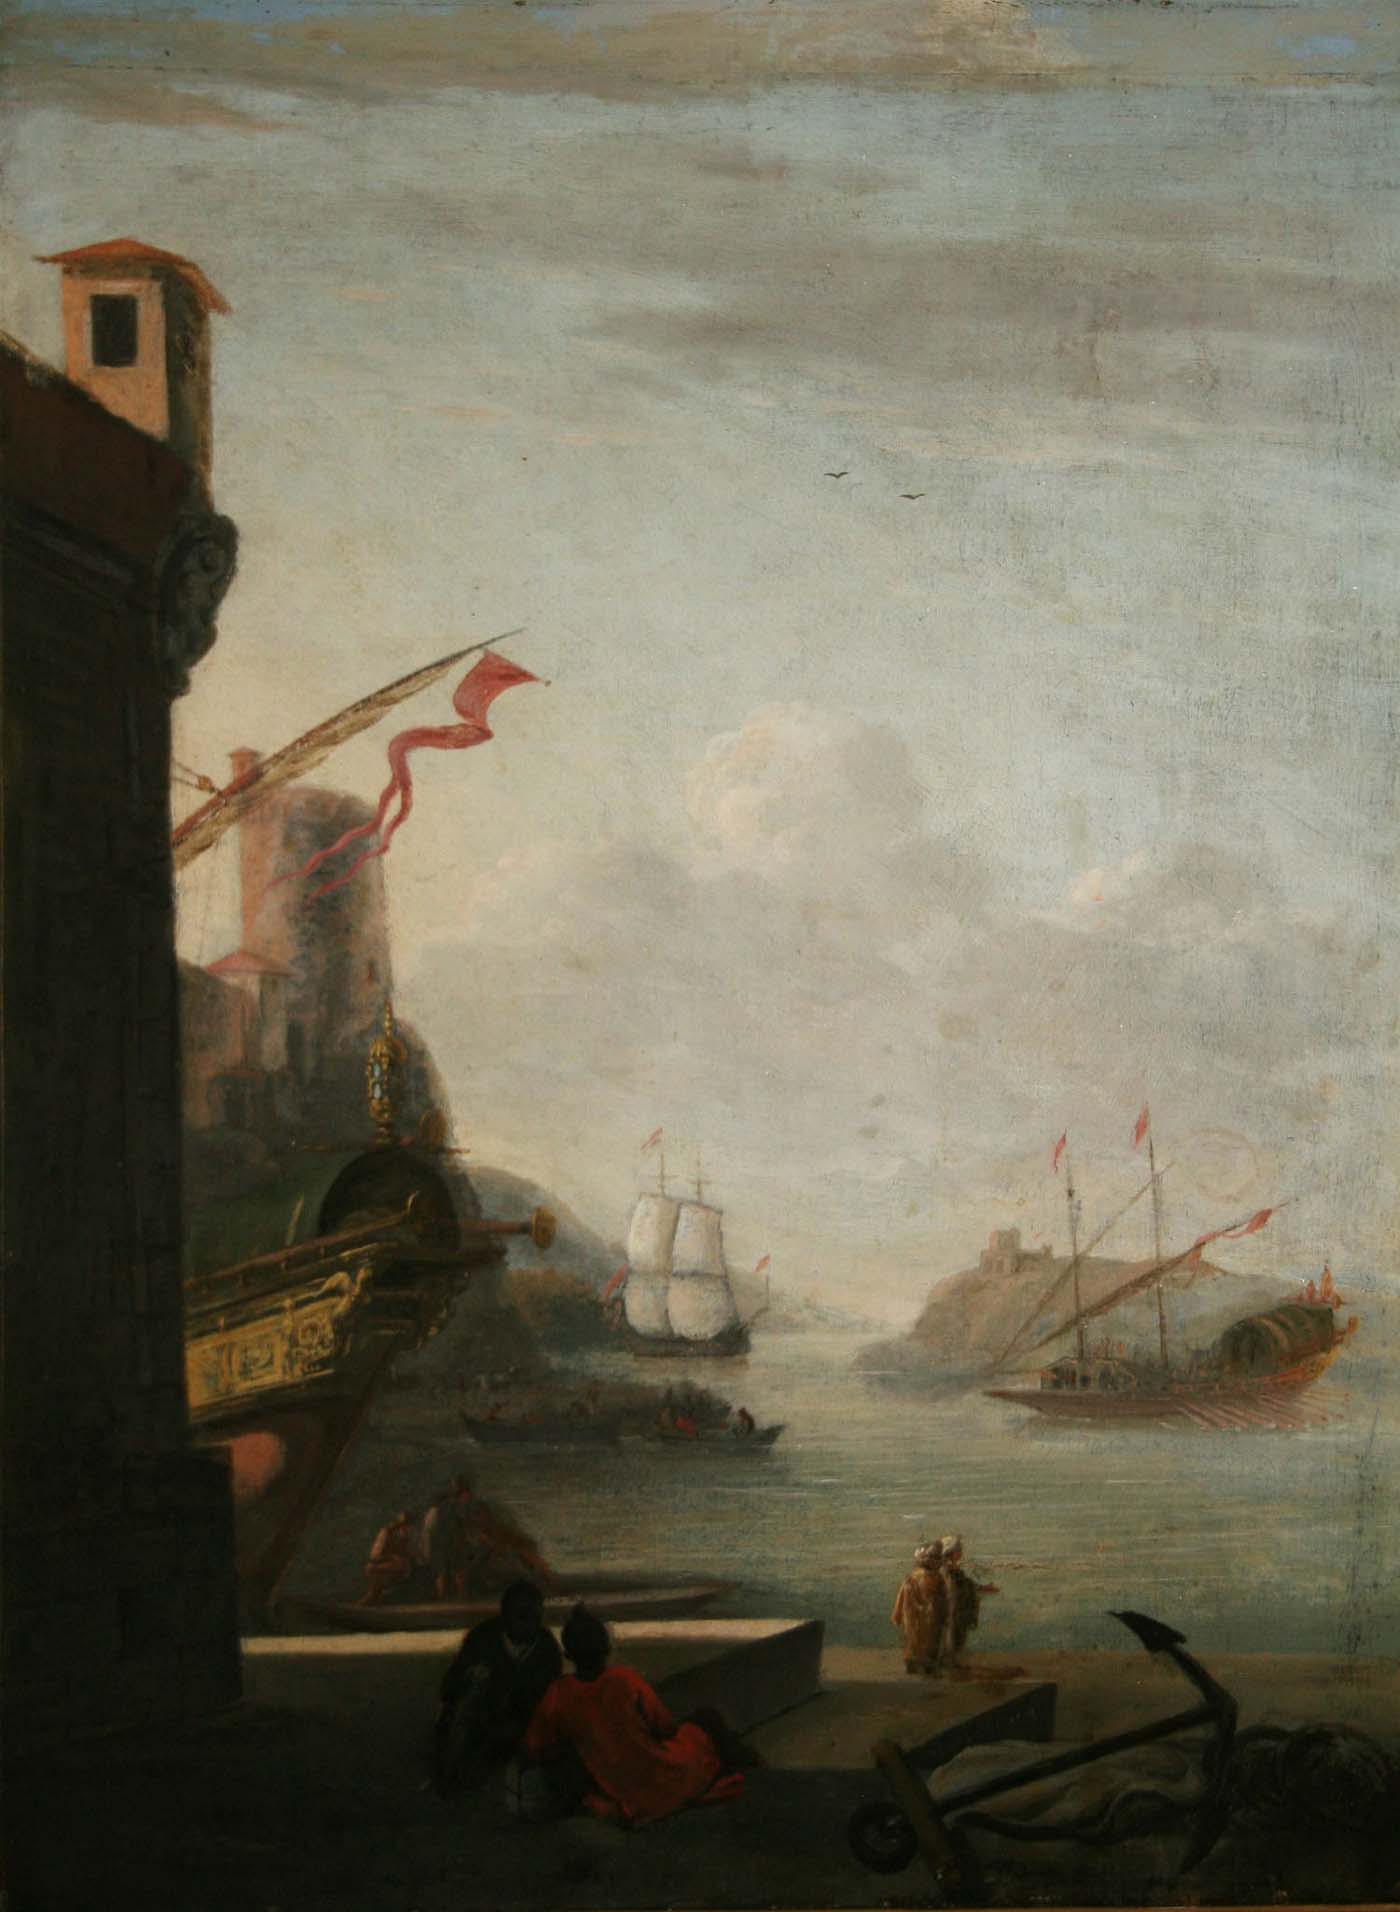 Follower of Johannes Lingelbach
A MEDITERRANEAN HARBOUR SCENE WITH TWO CHILDREN SITTING ON THE